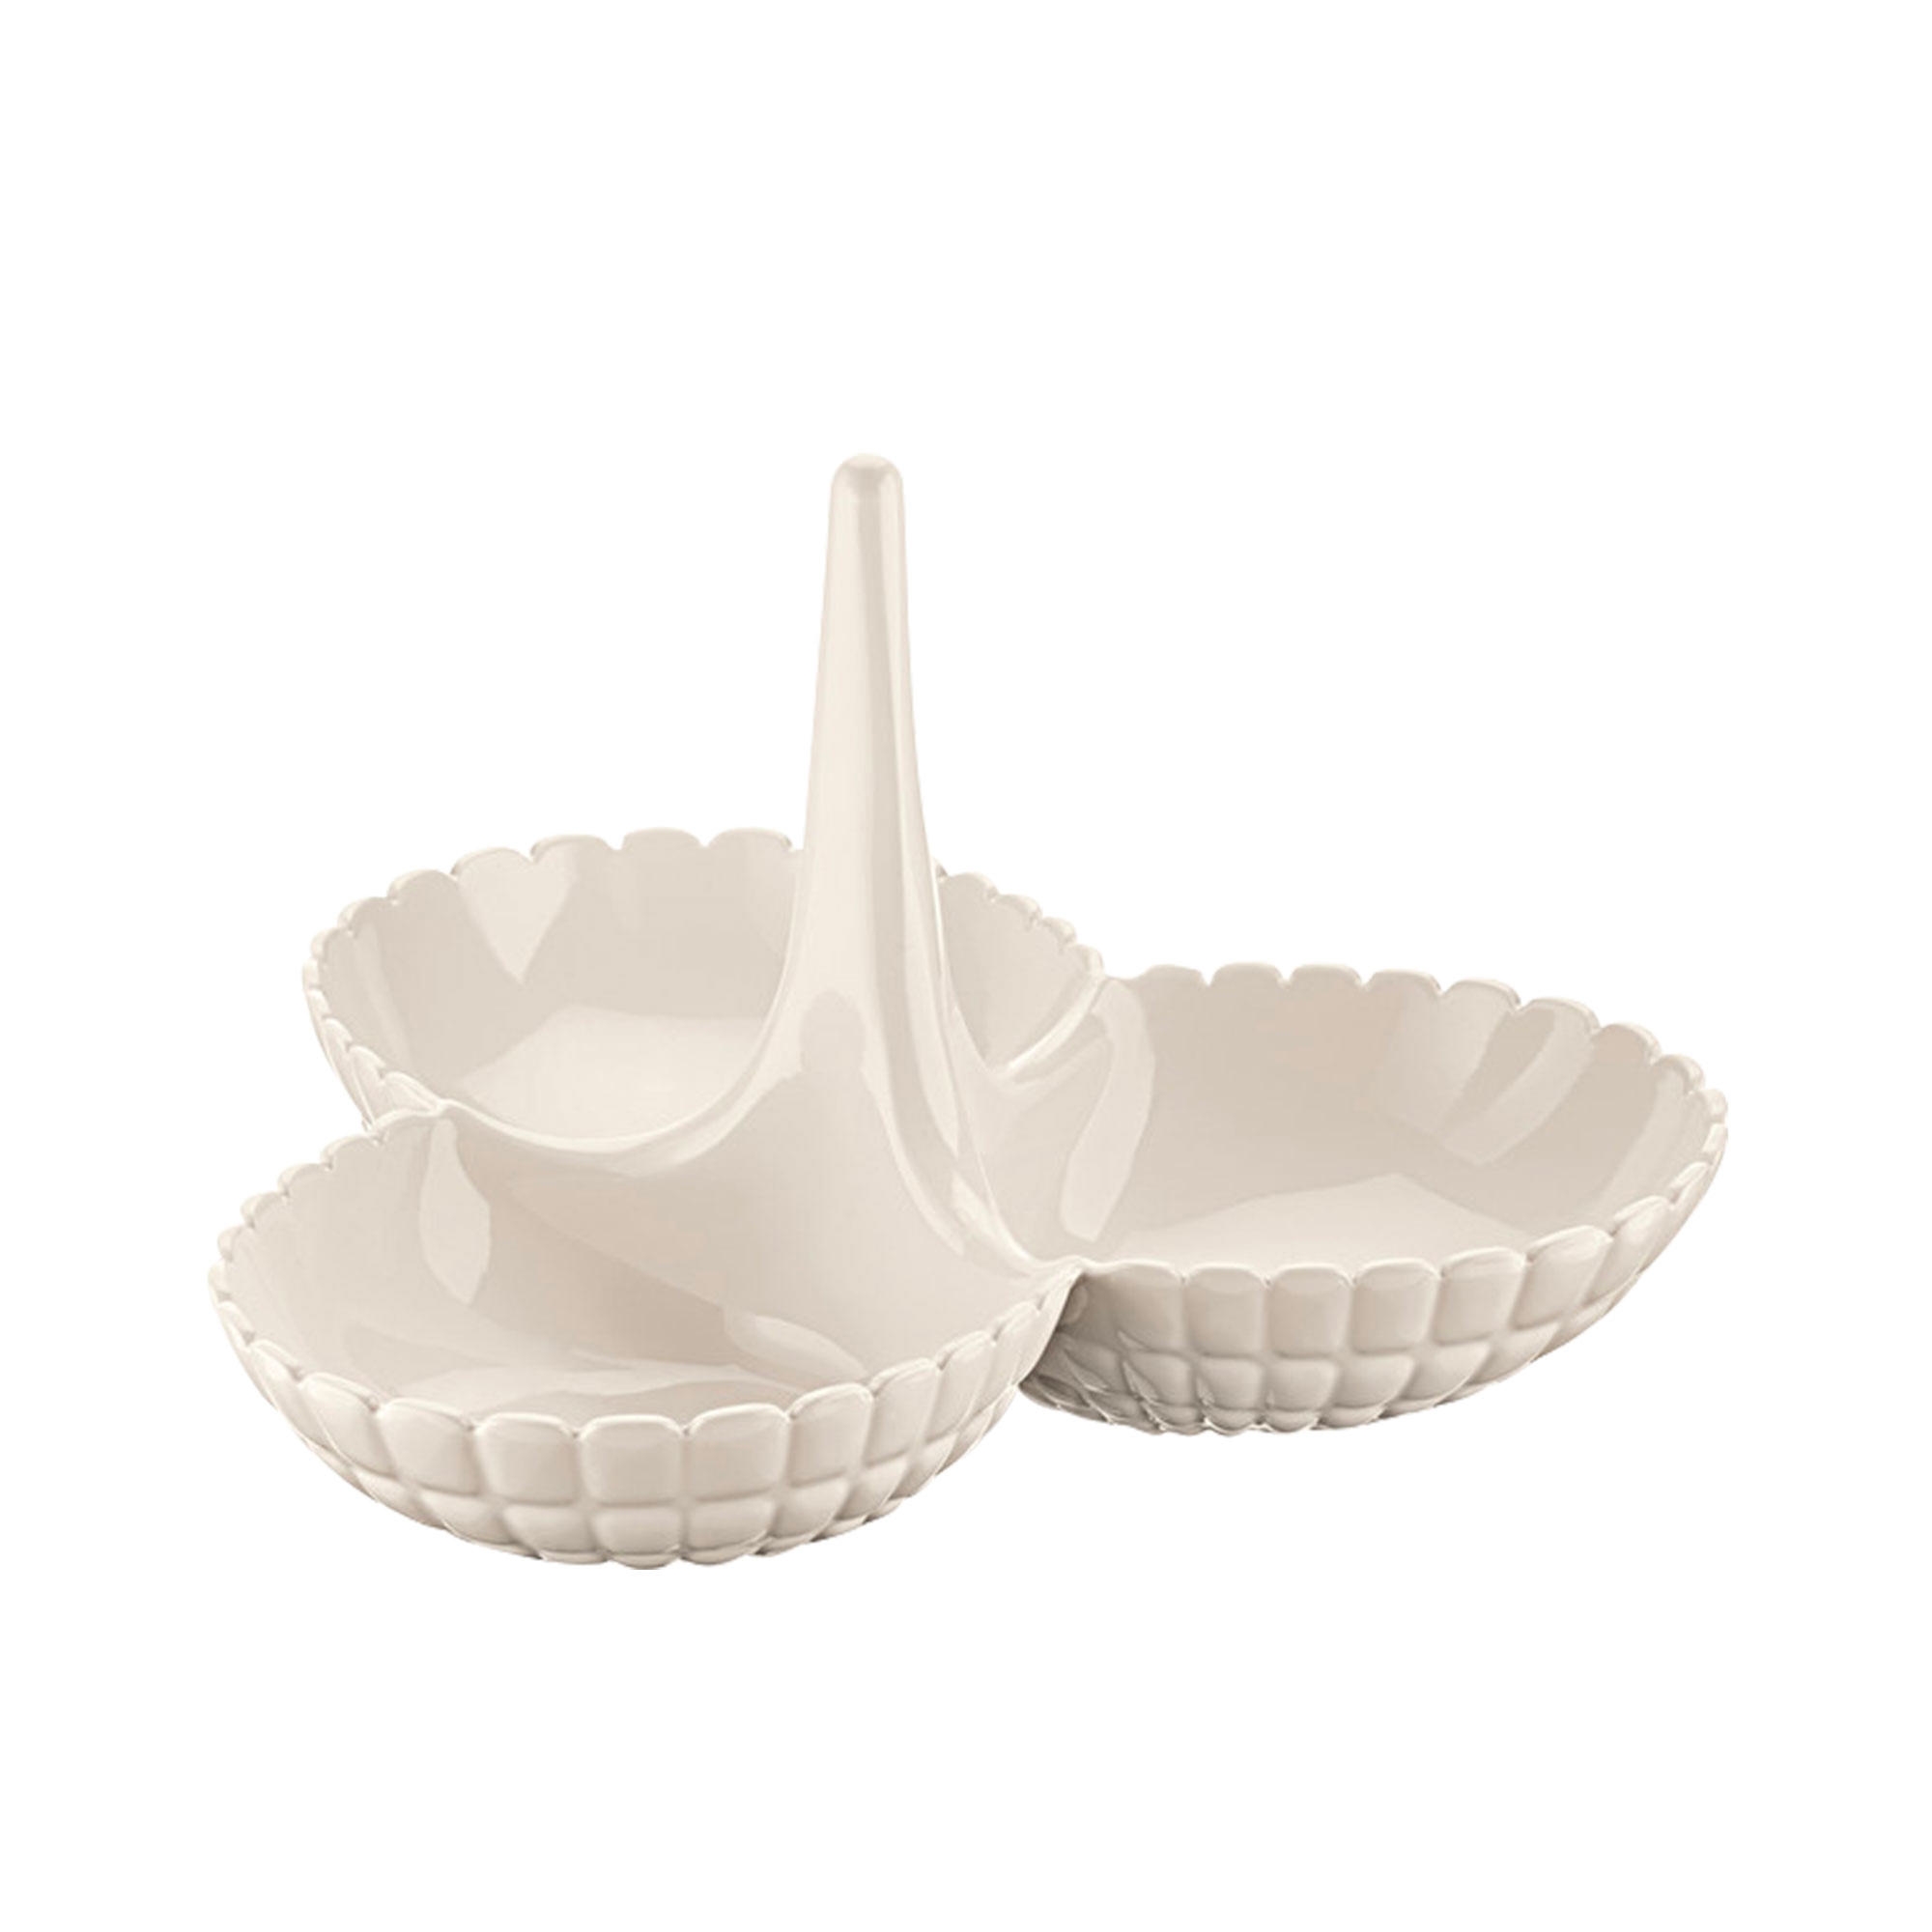 Guzzini Tiffany Hors D'oeuvres Serving Dish White Image 1